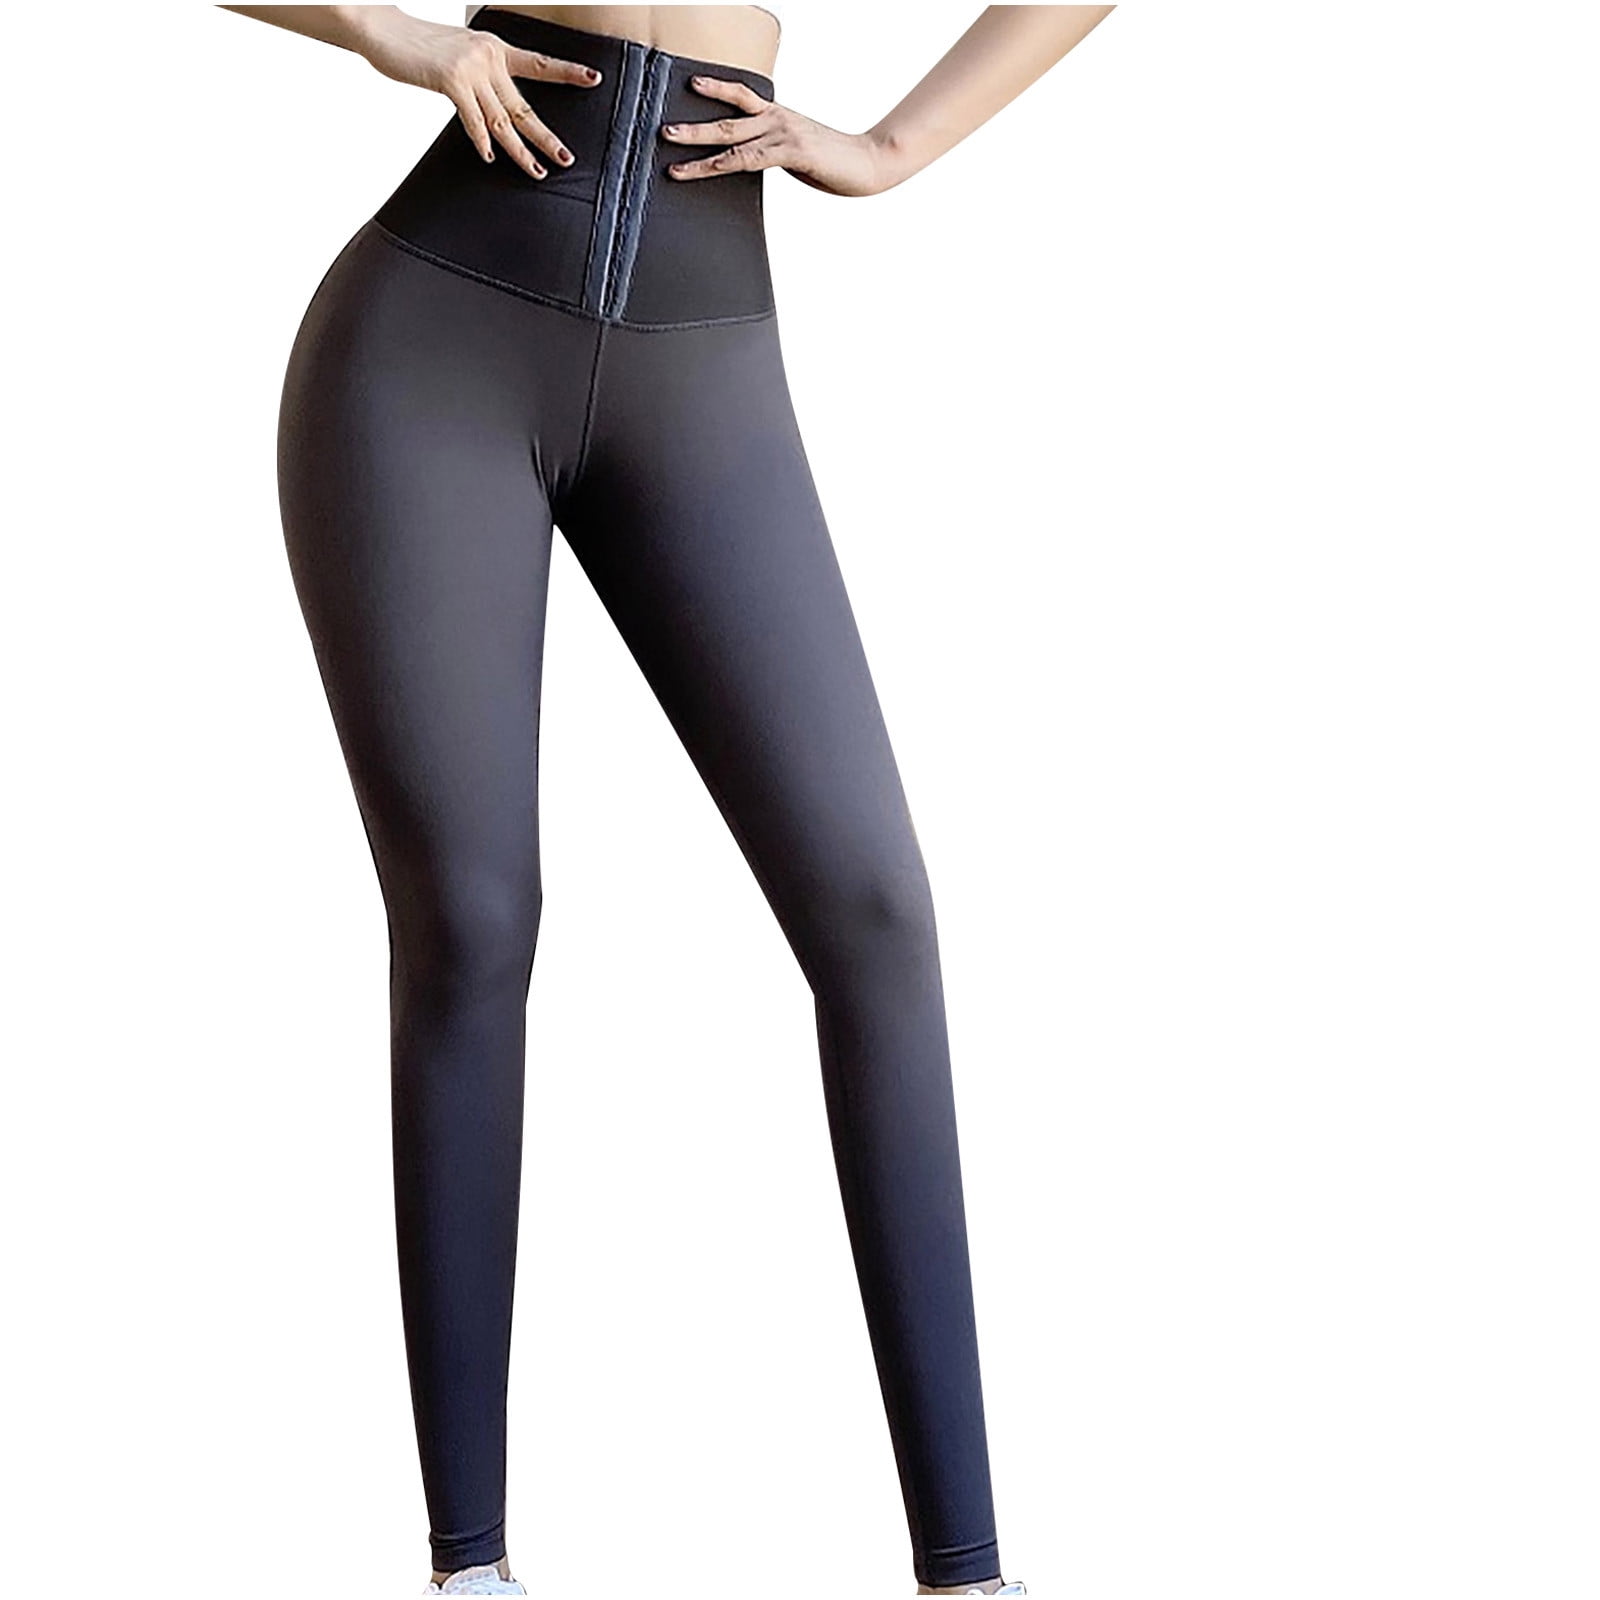 Firm ABS Womens Fitness Leggings Seamless Sports Pants Pocket Running Workout Yoga Tummy Control Trousers 